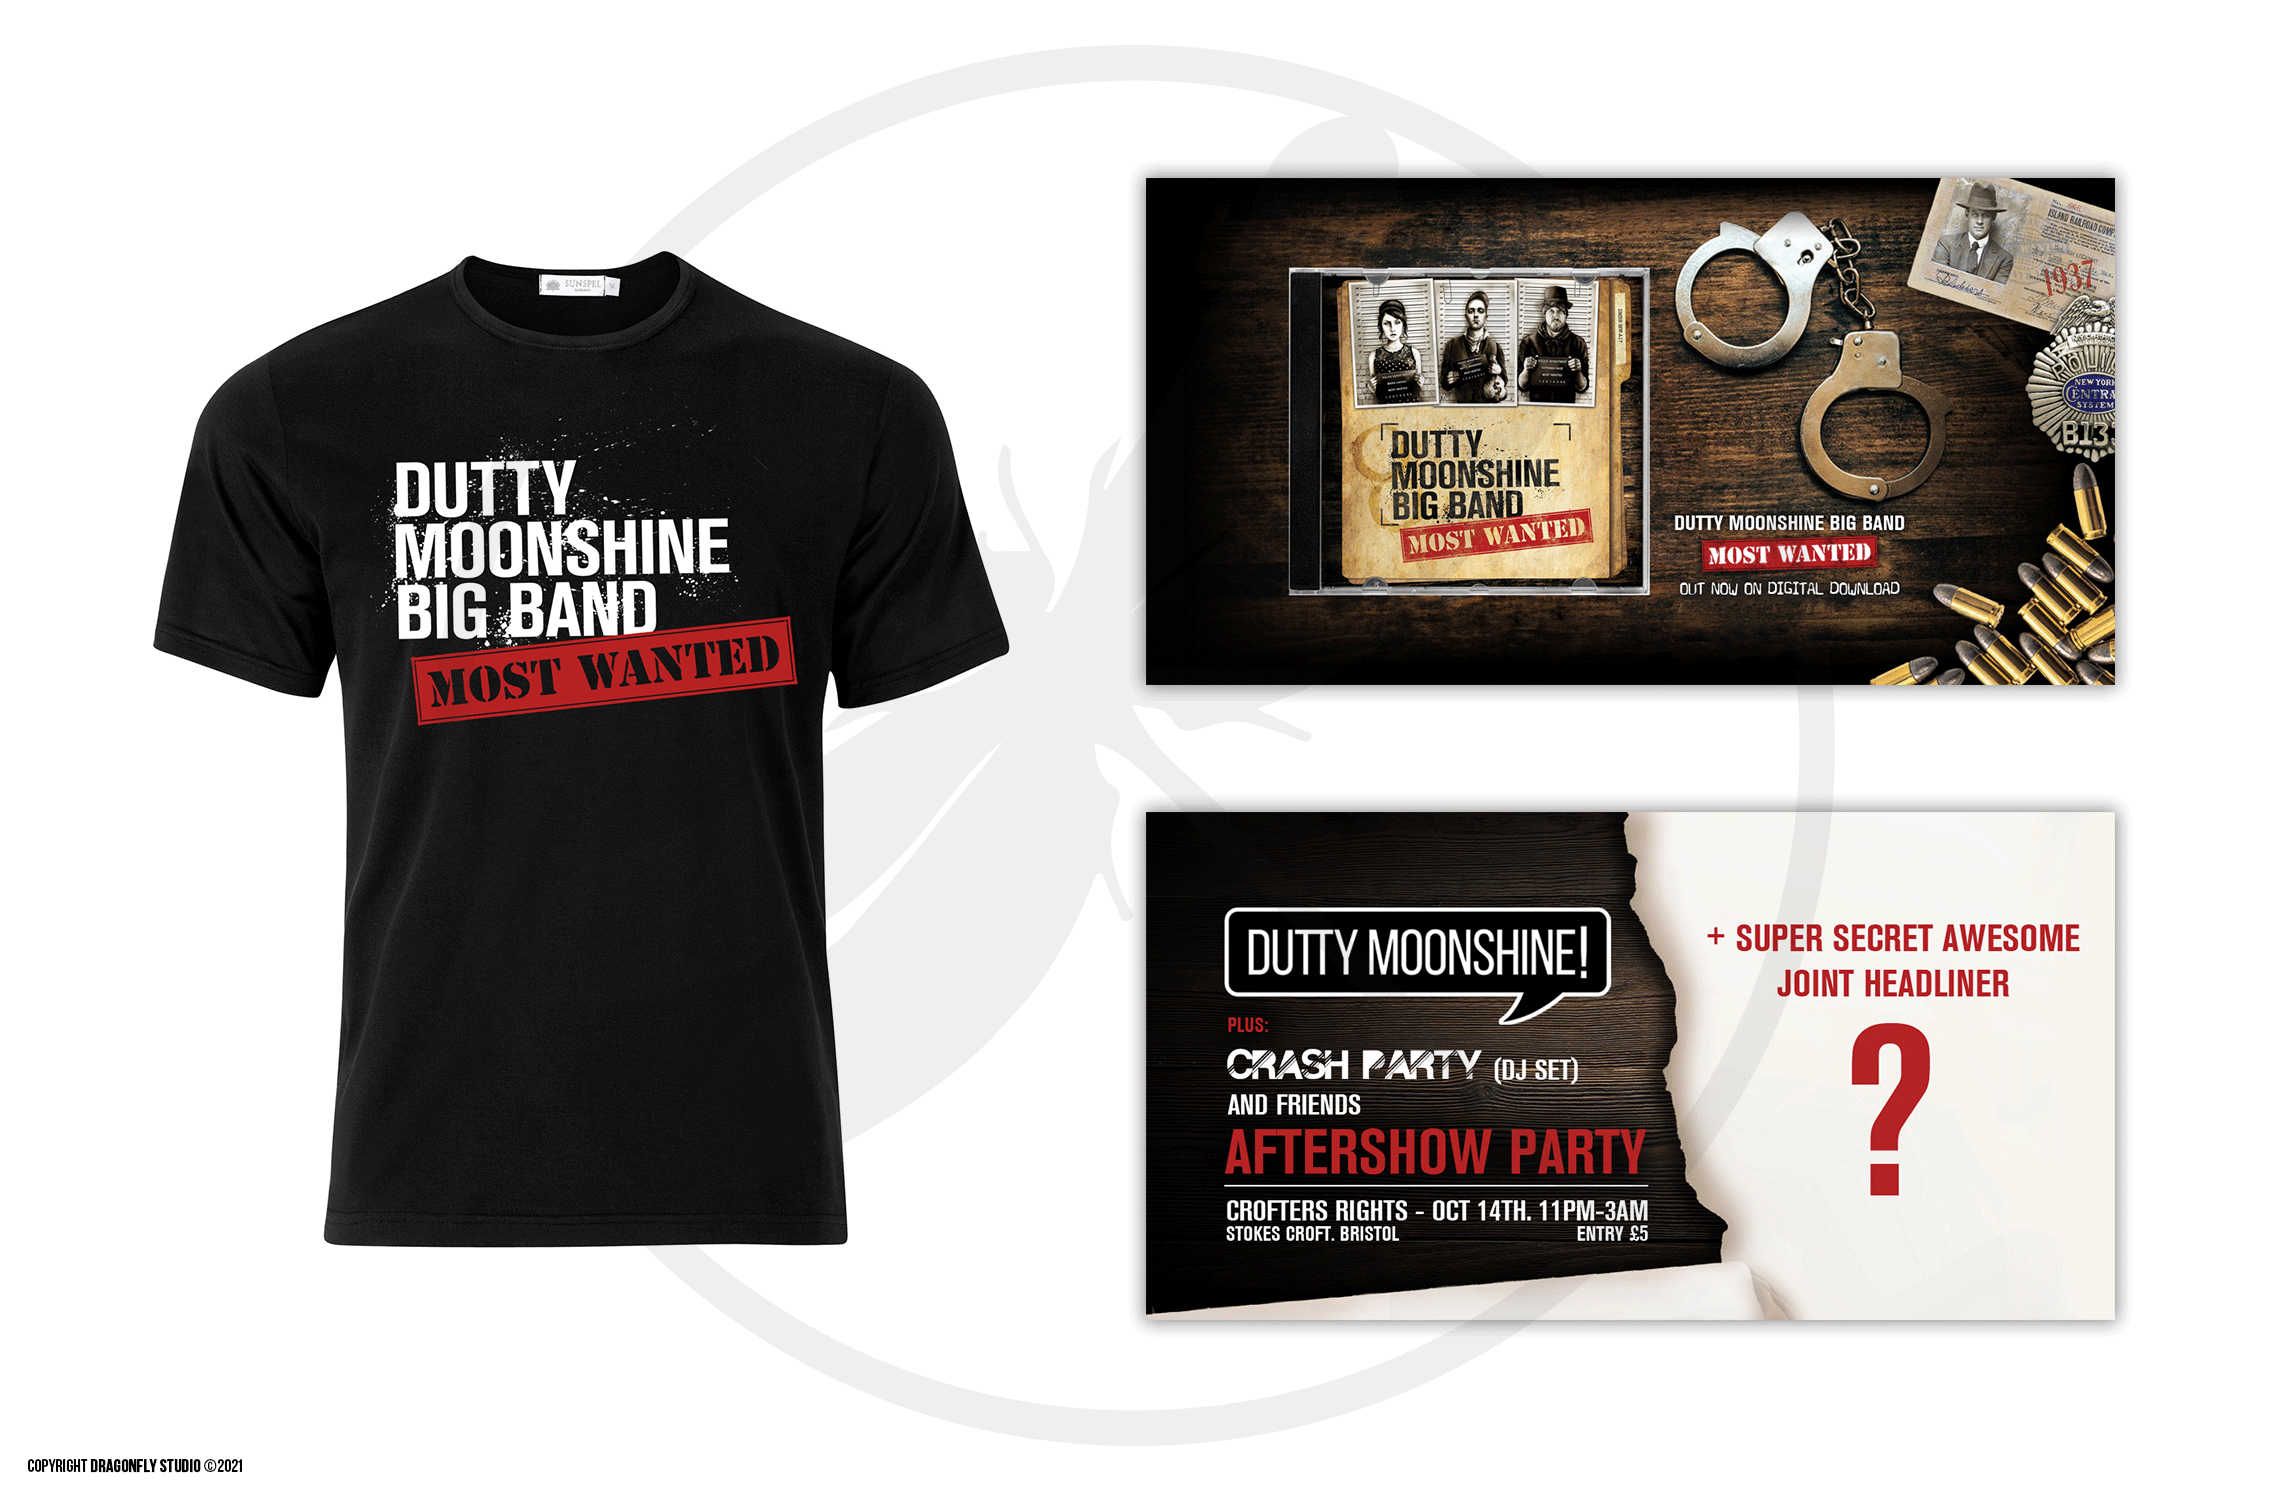 Dutty Moonshine Big Band - Most Wanted Promotional Material